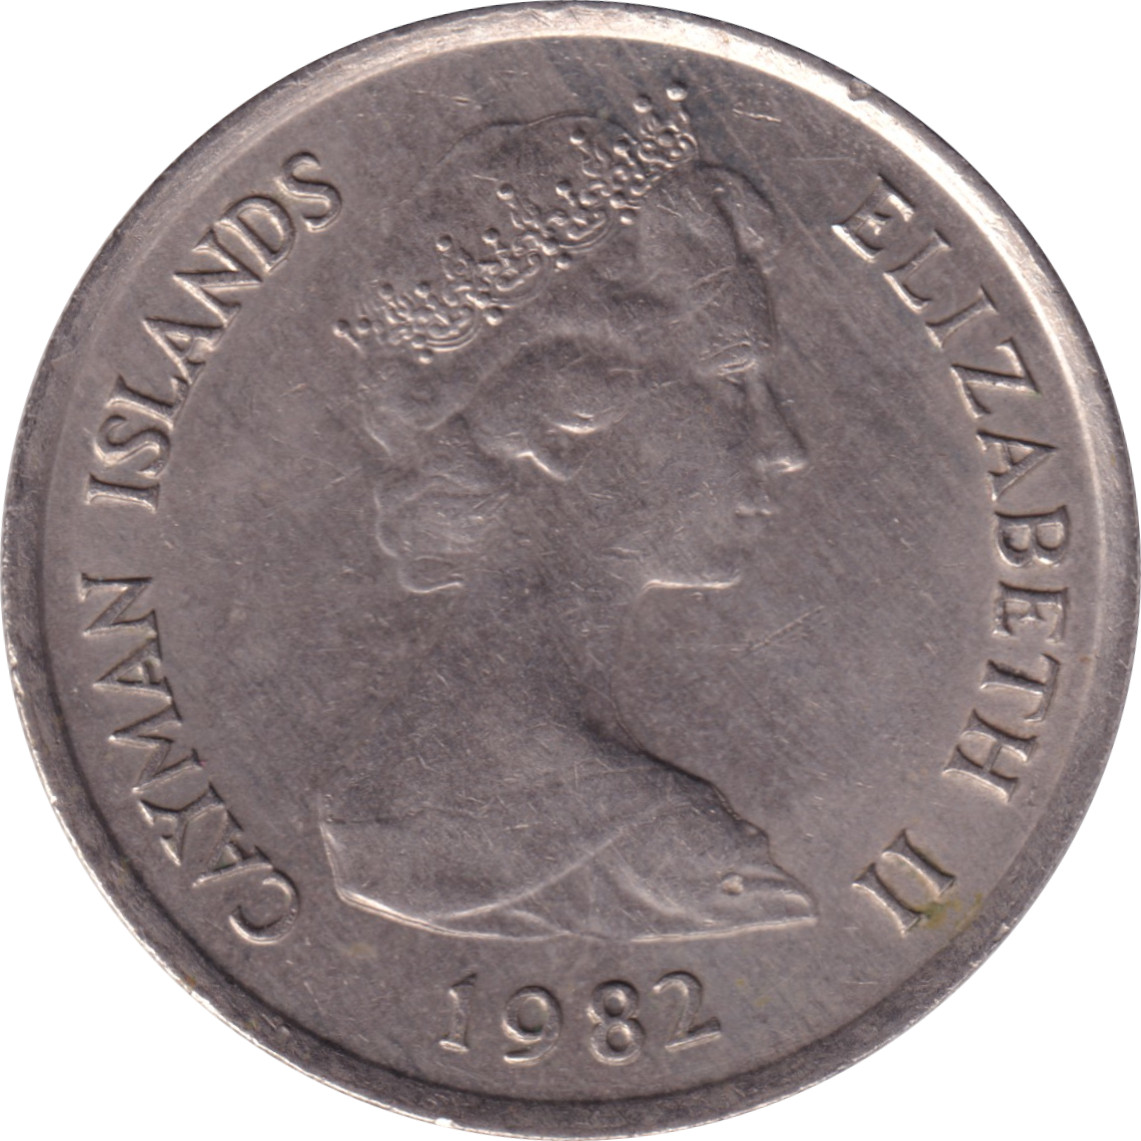 25 cents - Elizabeth II - Young bust